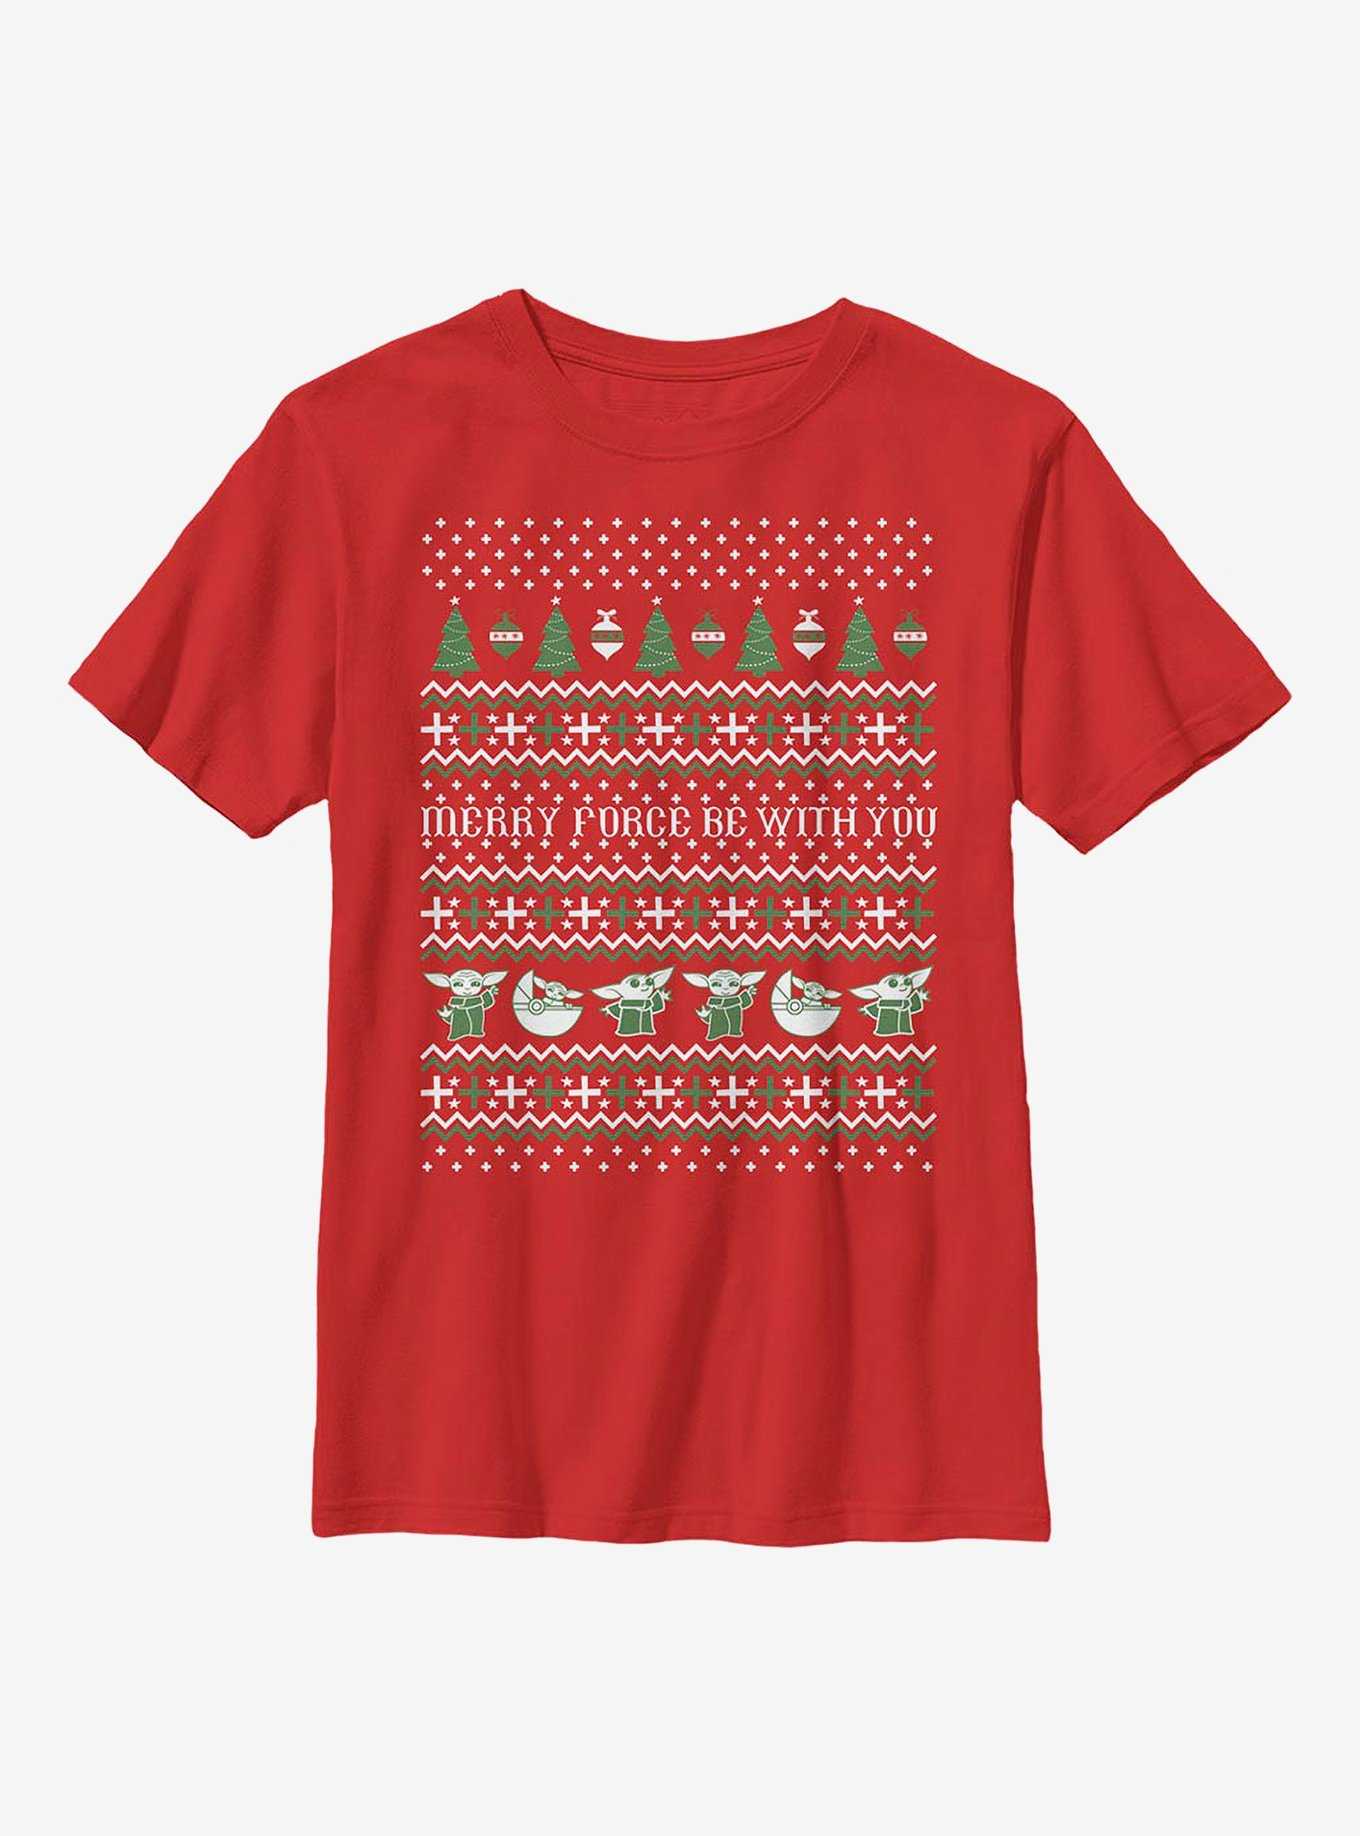 Star Wars The Mandalorian The Child Christmas Sweater Pattern Youth T-Shirt, , hi-res